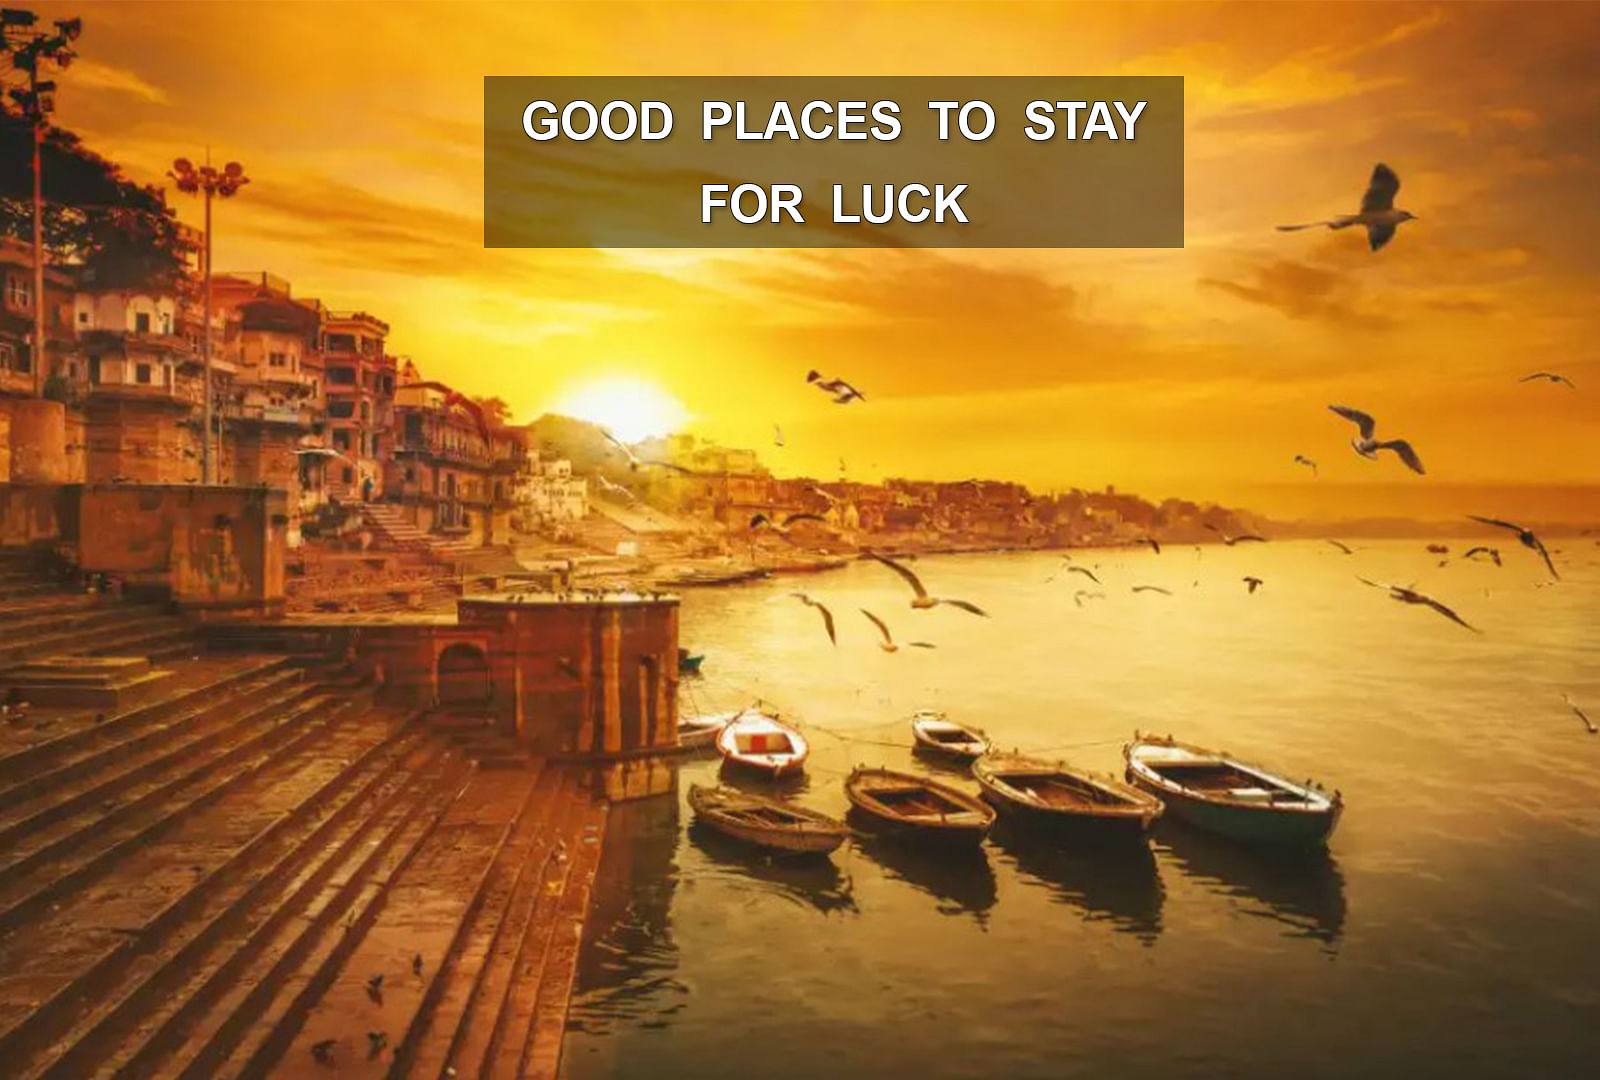 Places best for luck as per astrology